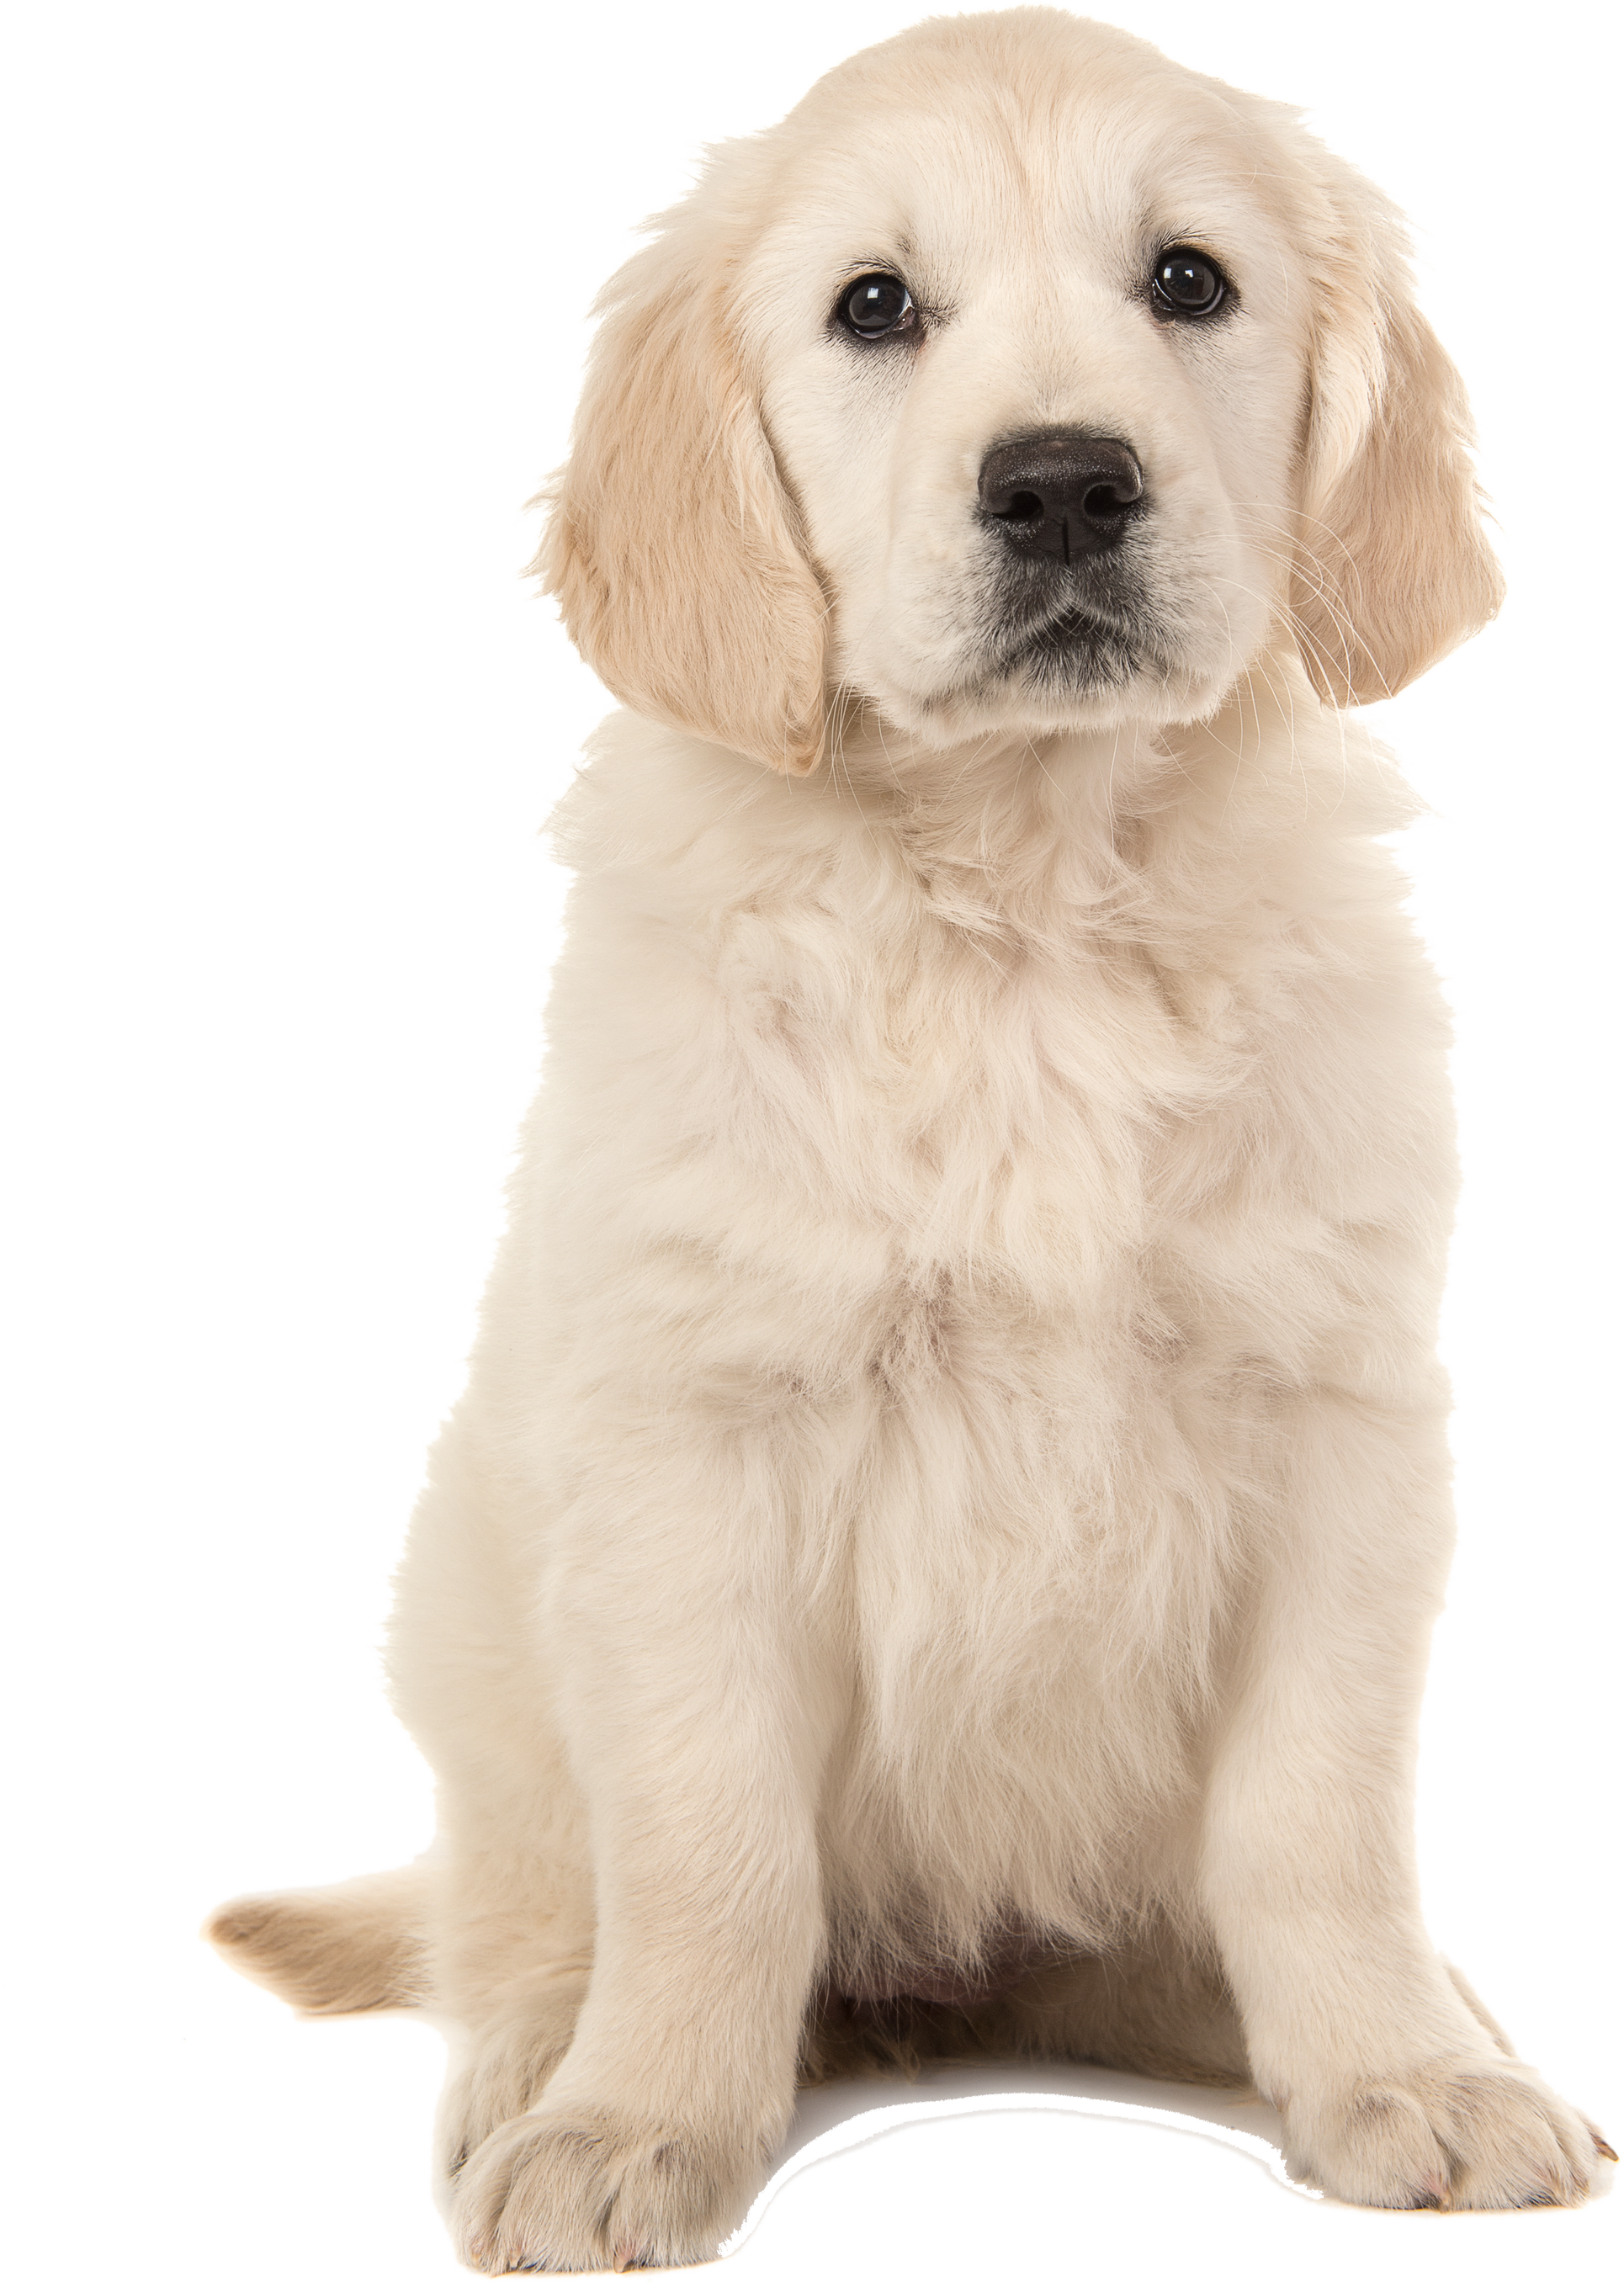 Cute Blond Golden Retriever Puppy Sitting and Facing the Camera Isolated on a White Background